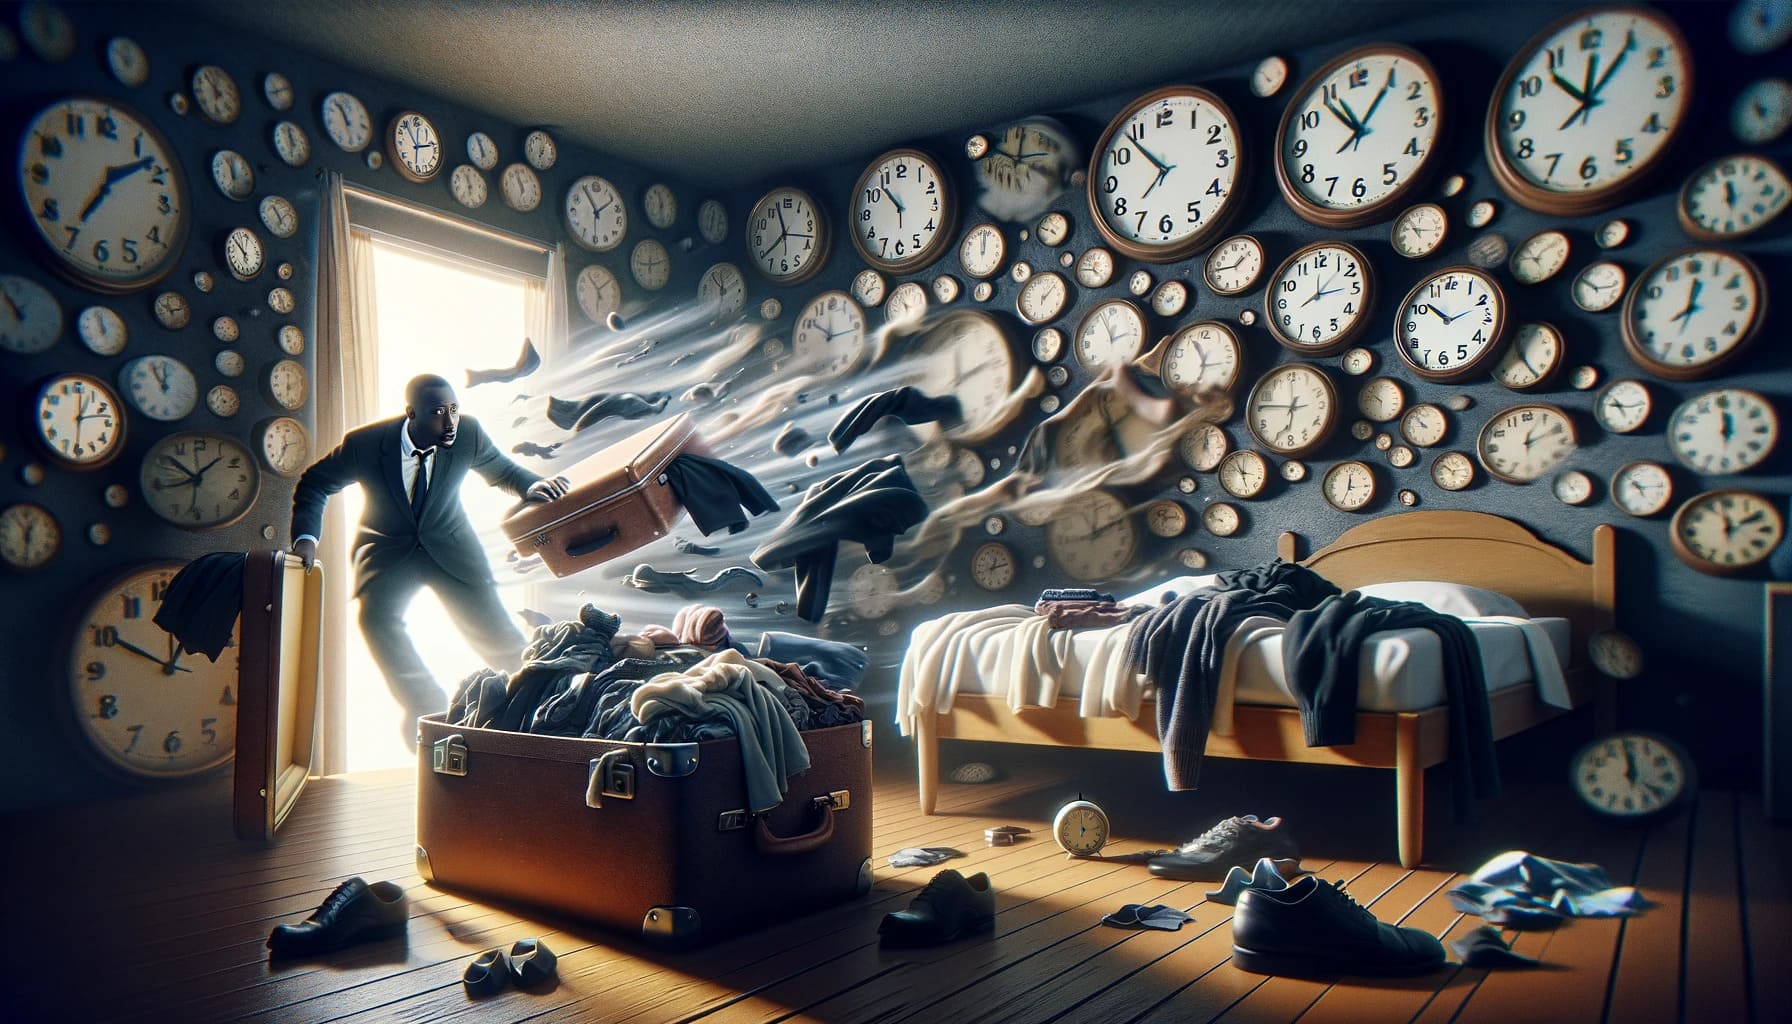 DALL%C2%B7E 2023 11 06 22.29.49 Visualize a chaotic dream sequence where someone is frantically packing a suitcase in a room where the walls are adorned with clocks showing nearly mi